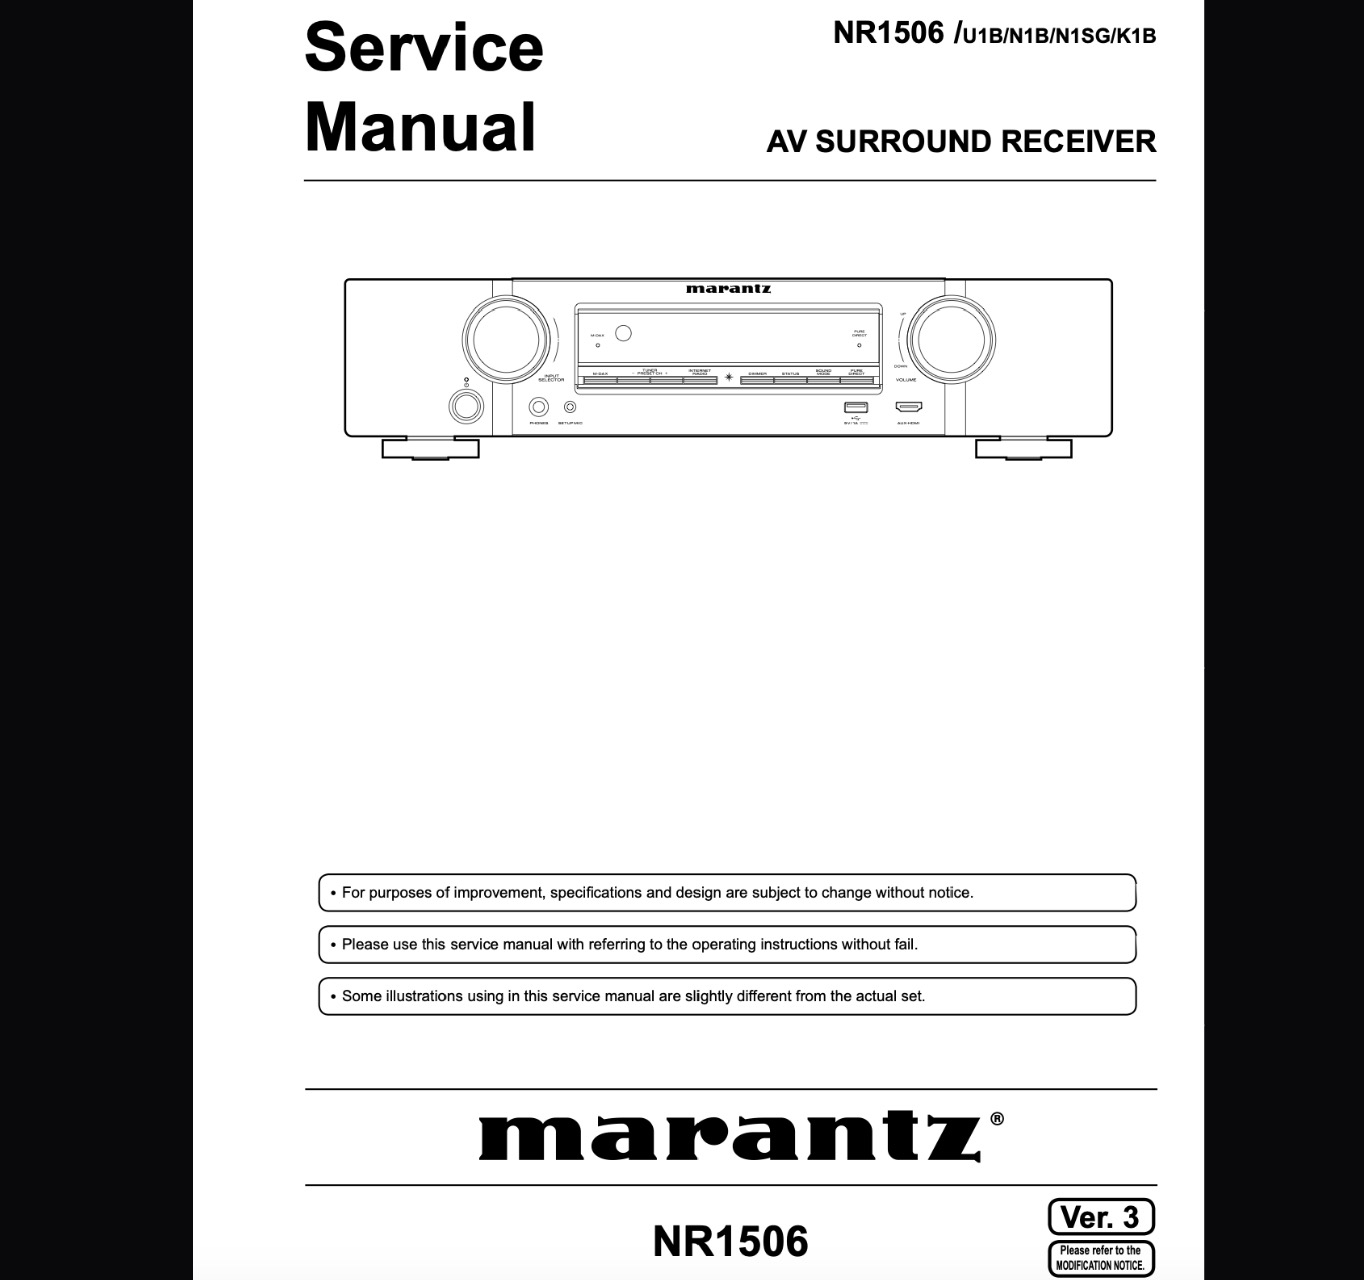 Marantz NR1506 AV Surround Receiver Service Manual, Parts List, Exploded View, Wiring and Schematic Diagram